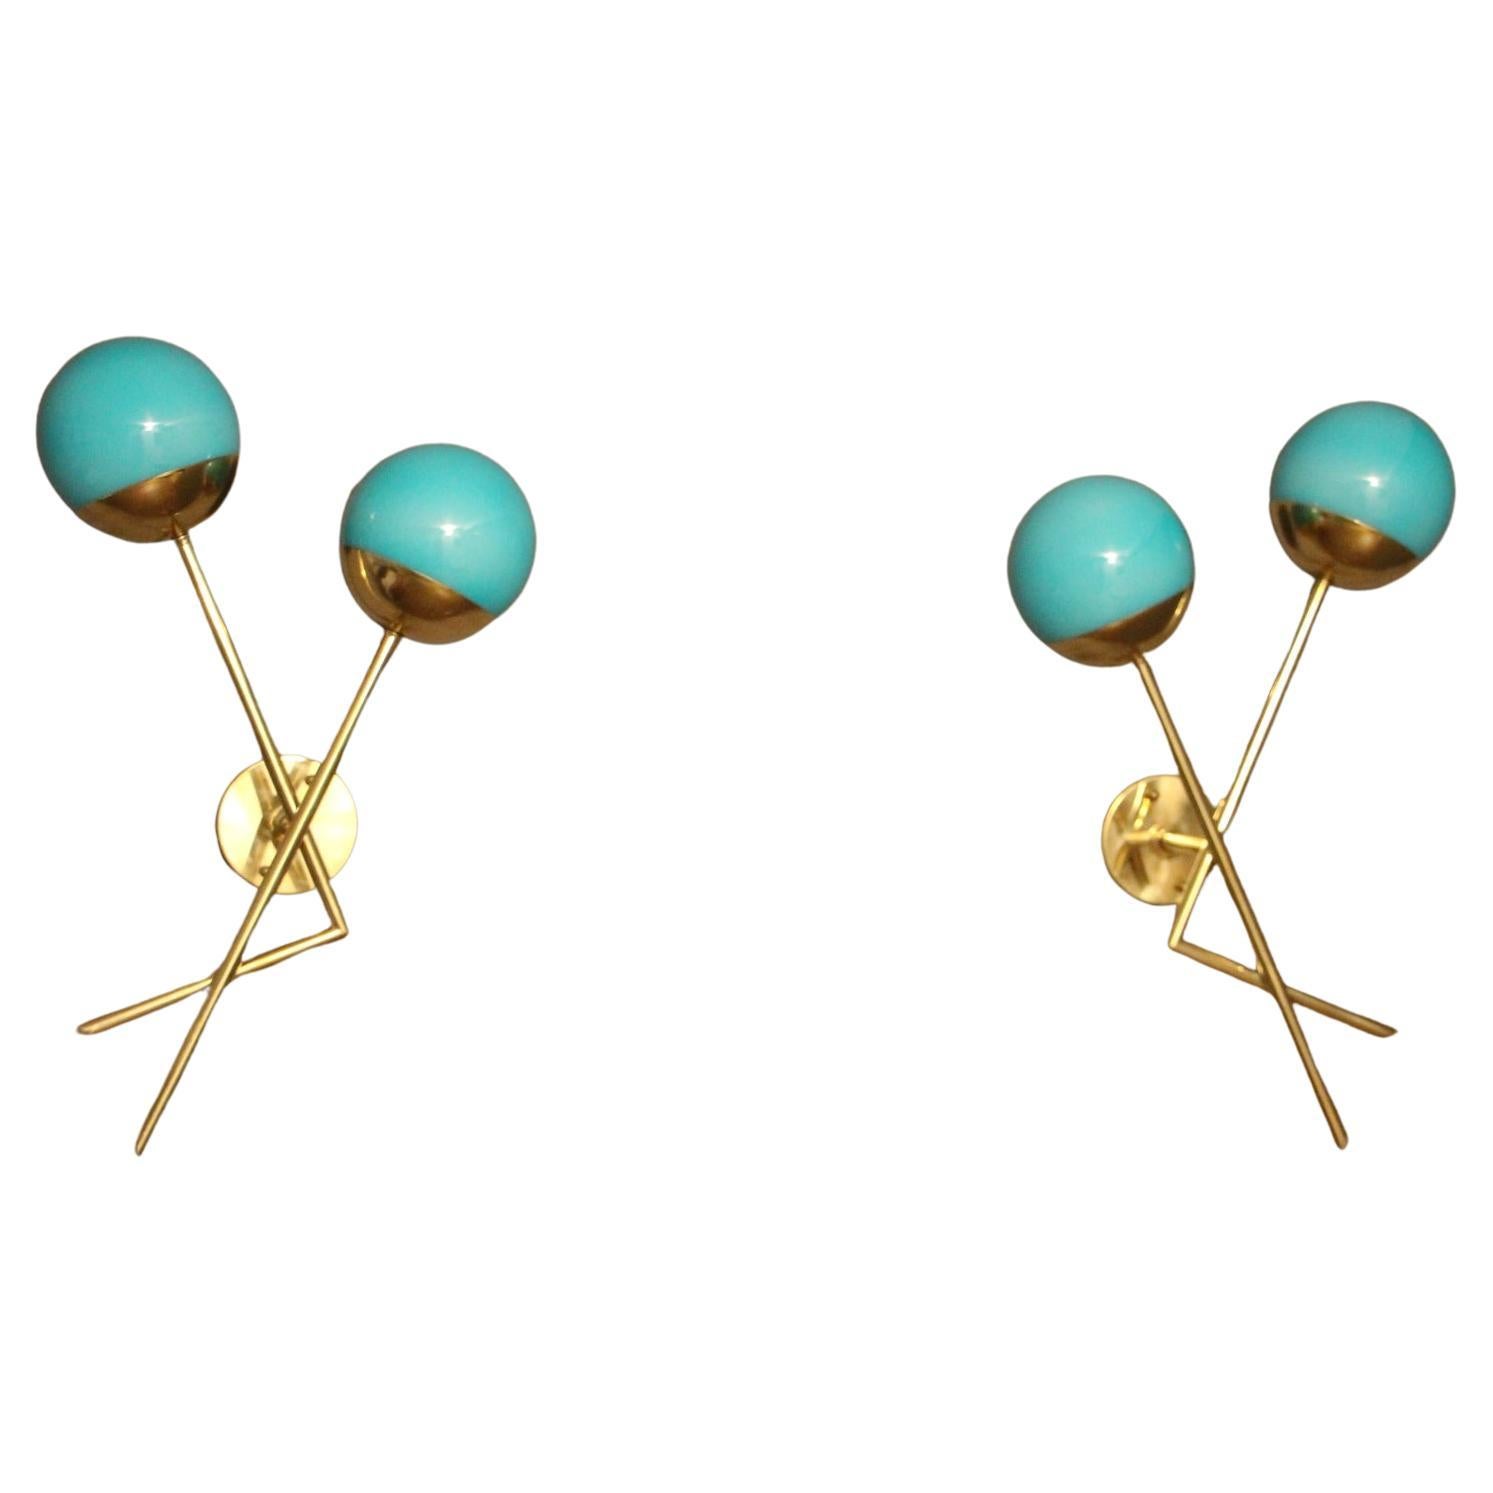 Pair of Sconces in Turquoise Blue Murano Glass and Brass, Blue Wall Lights